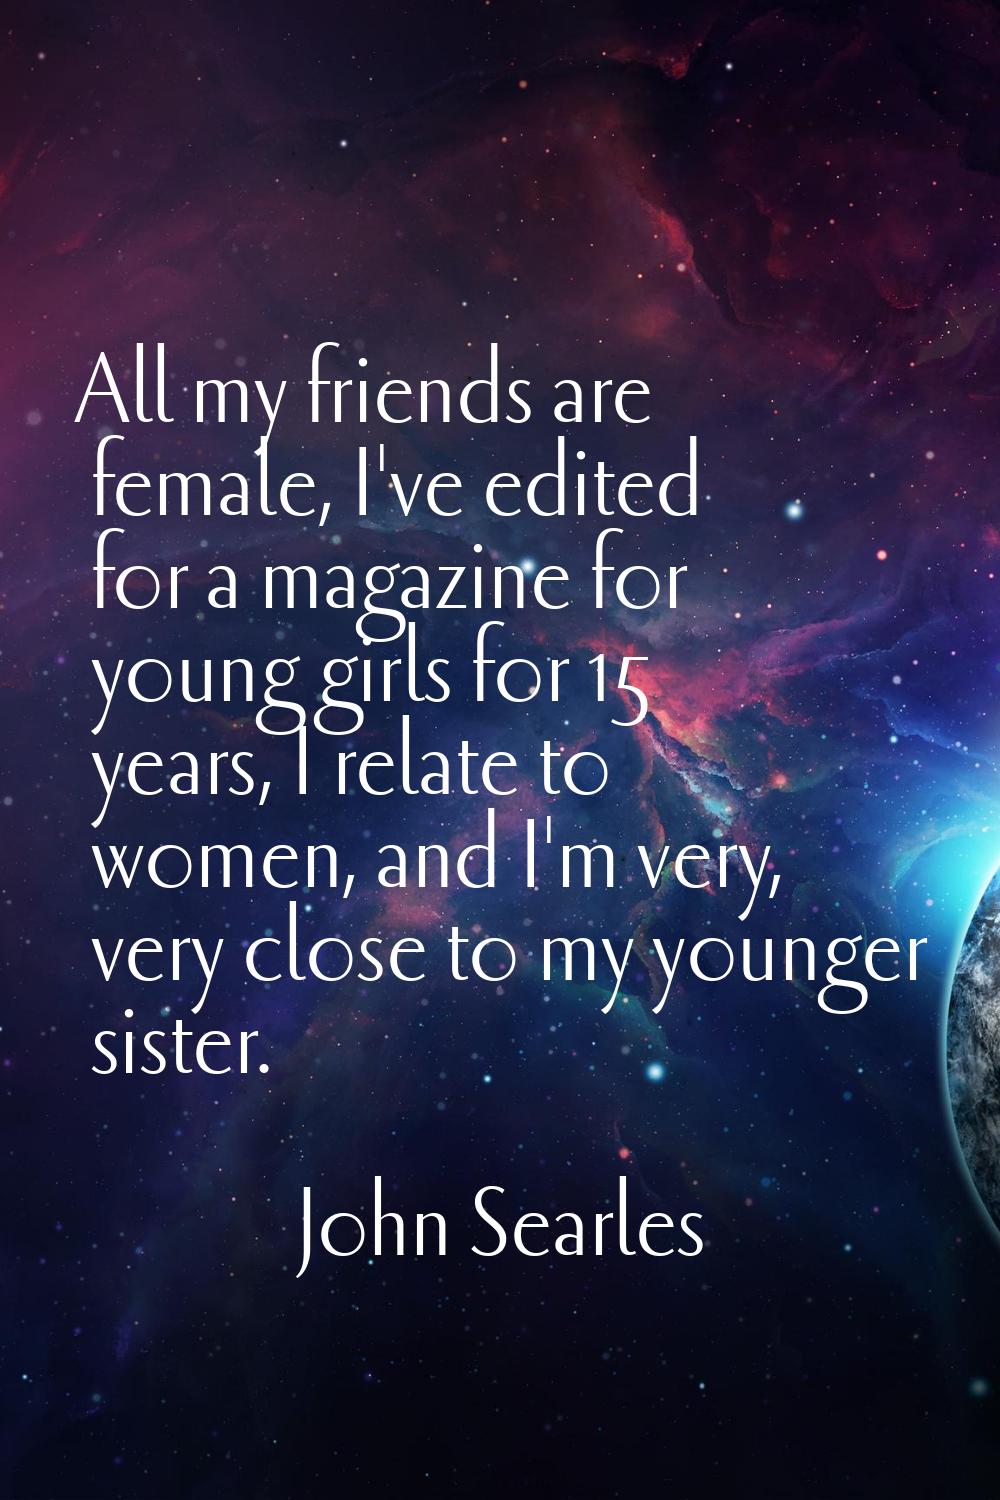 All my friends are female, I've edited for a magazine for young girls for 15 years, I relate to wom